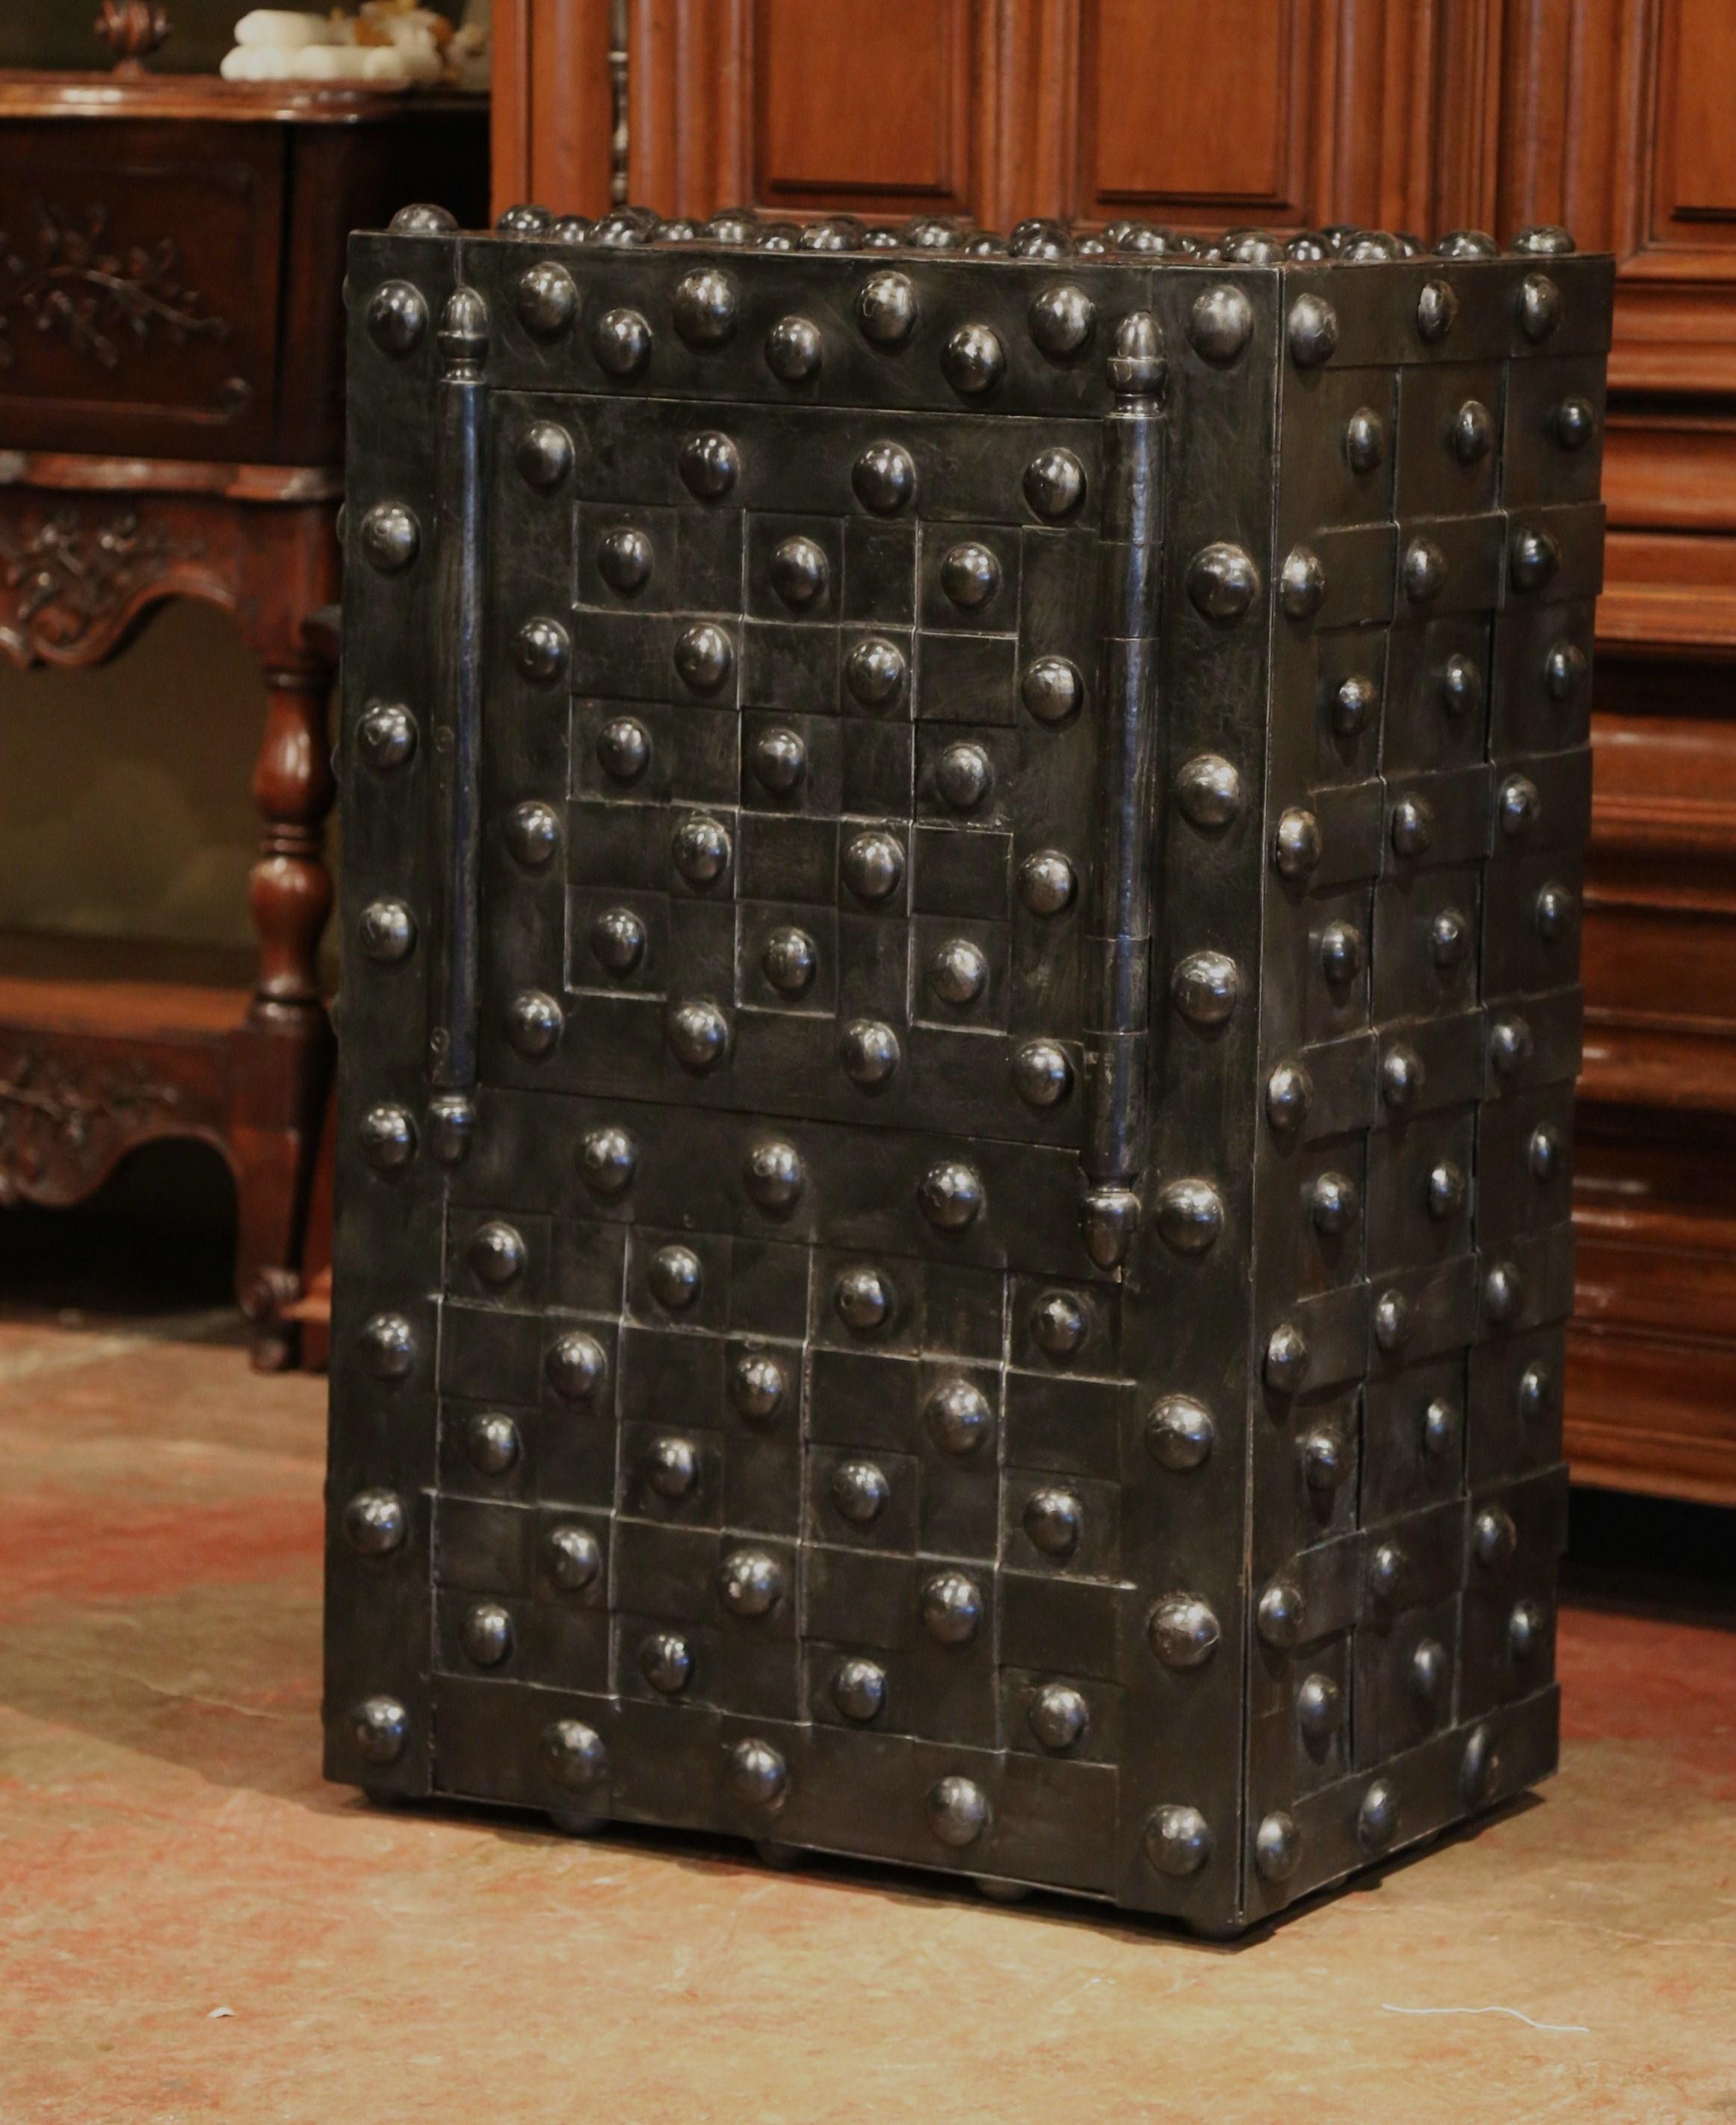 Keep your valuables and important documents in this large antique hobnail safe. Manufactured by Magaud de Charf in Marseilles, France circa 1870, the wrought iron safe is decorated with nail head motifs on all four sides and has an all-original,